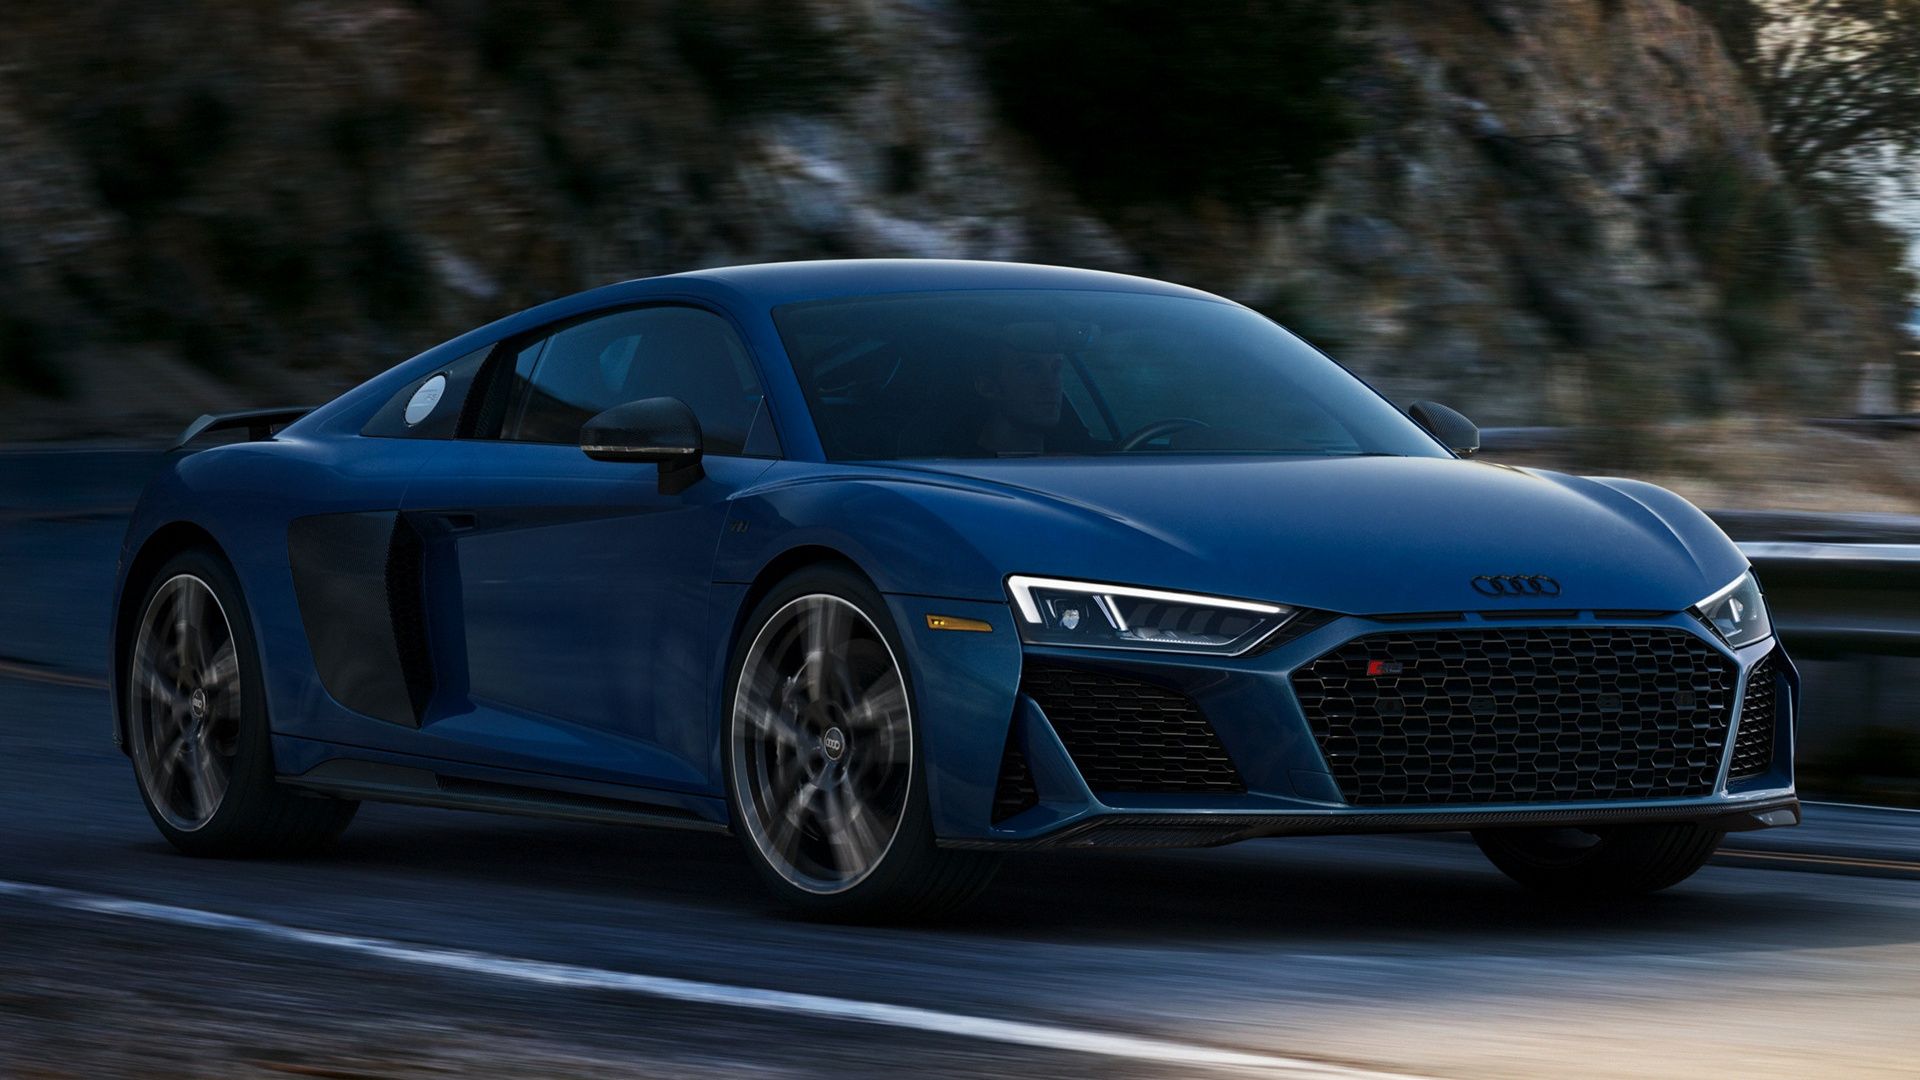 Audi R8 Coupe Performance (US) and HD Image